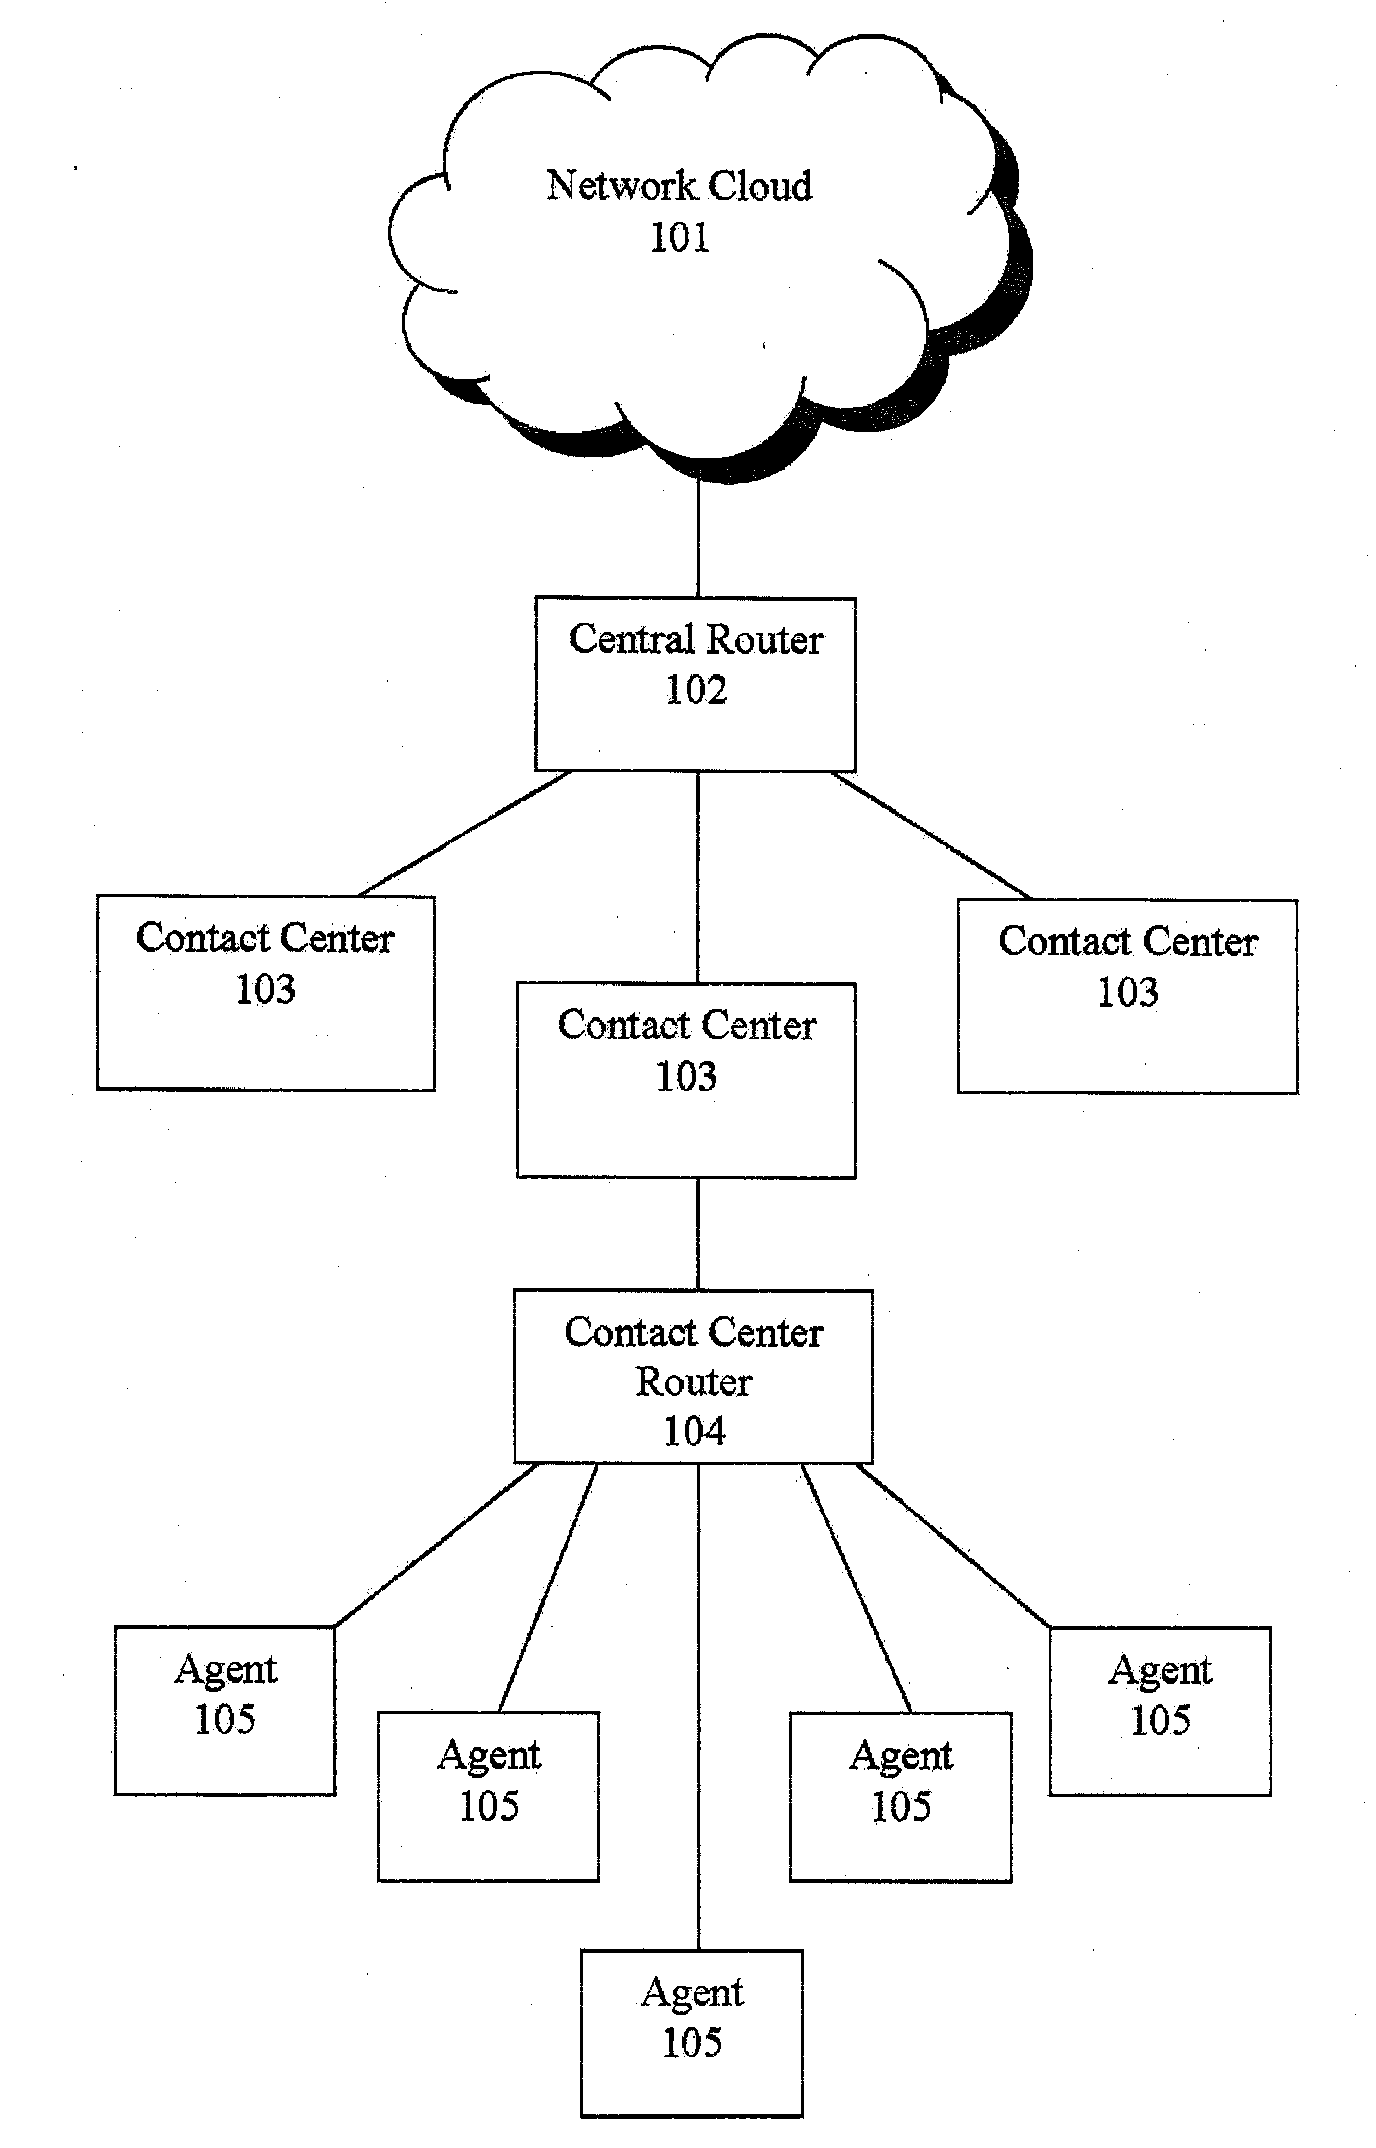 Routing callers out of queue order for a call center routing system